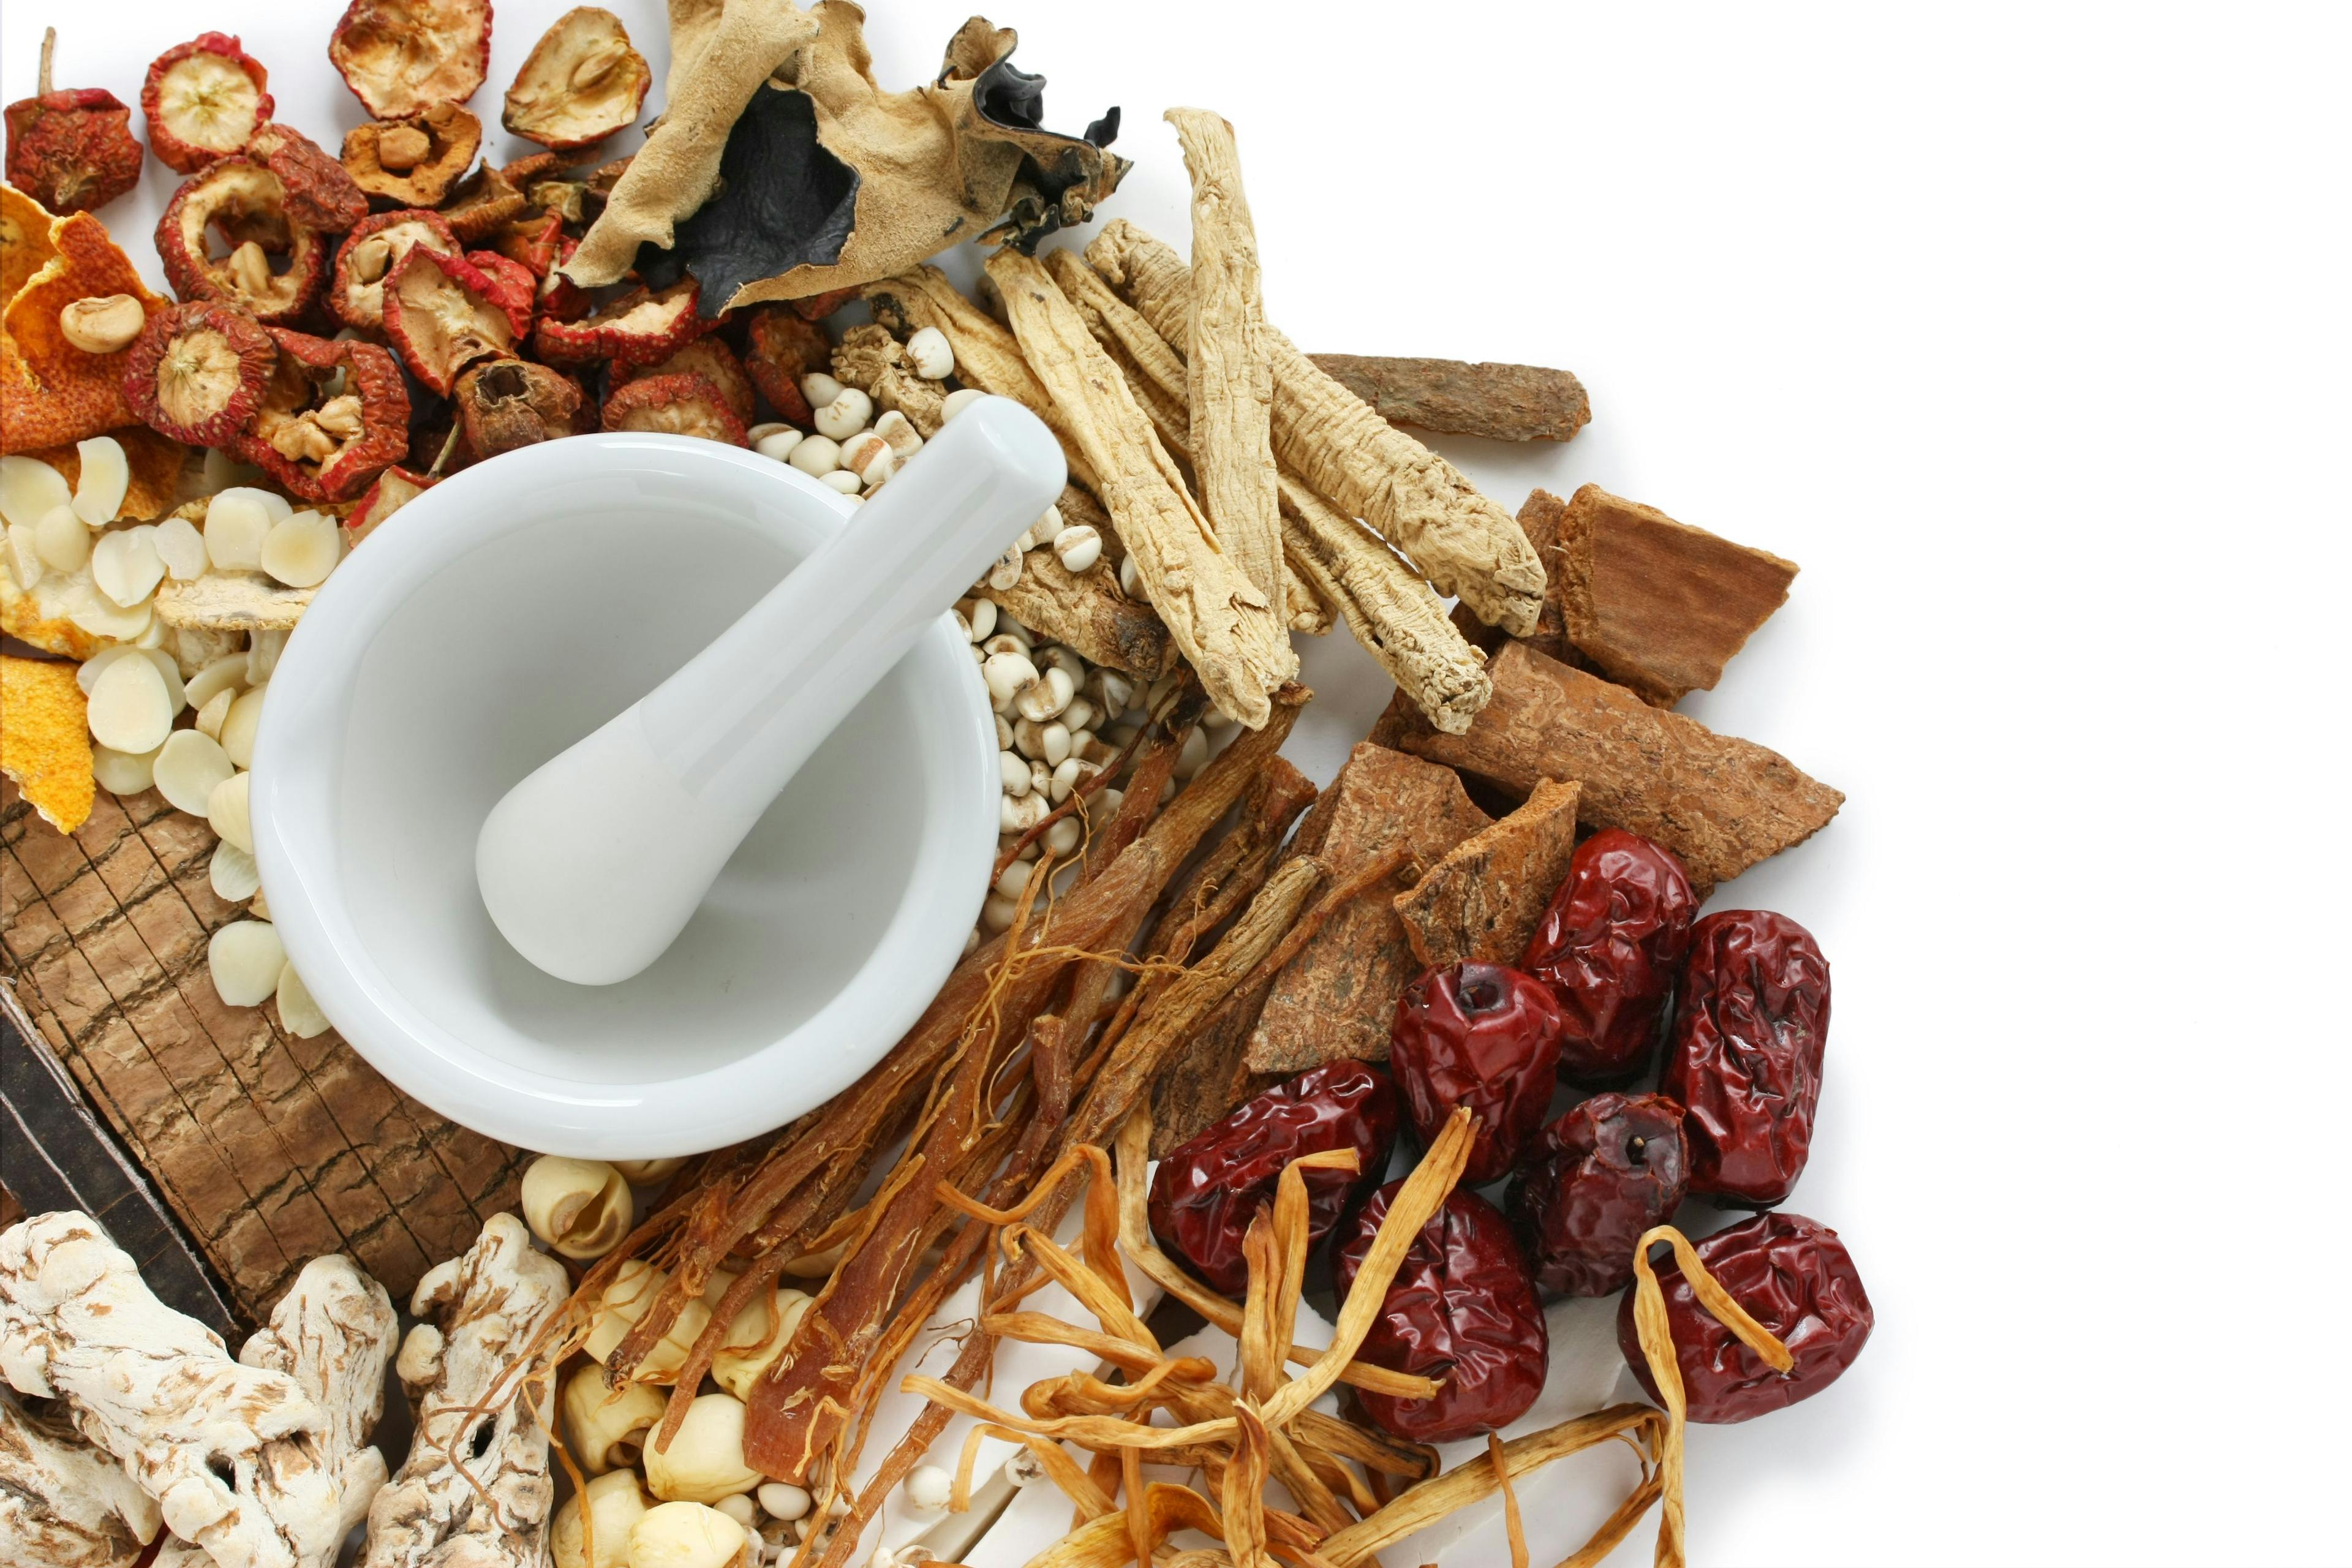 chinese food therapy, traditional chinese herbal medicine | Image Credit: © uckyo - stock.adobe.com